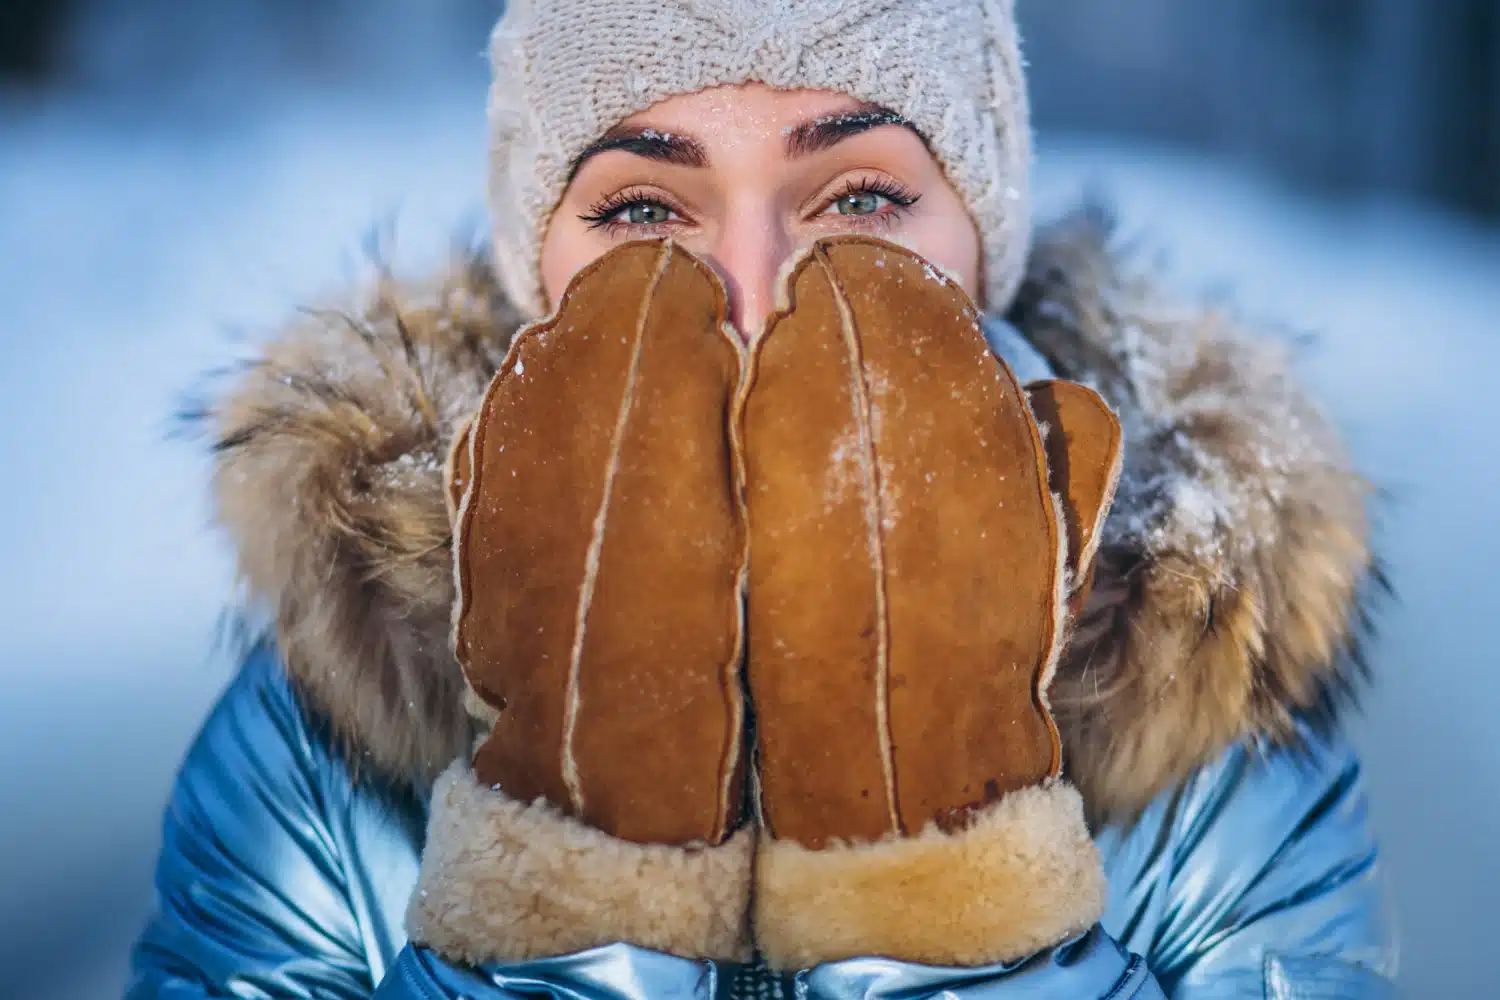 Read more about the article Glove Warmly with Vermont Glove